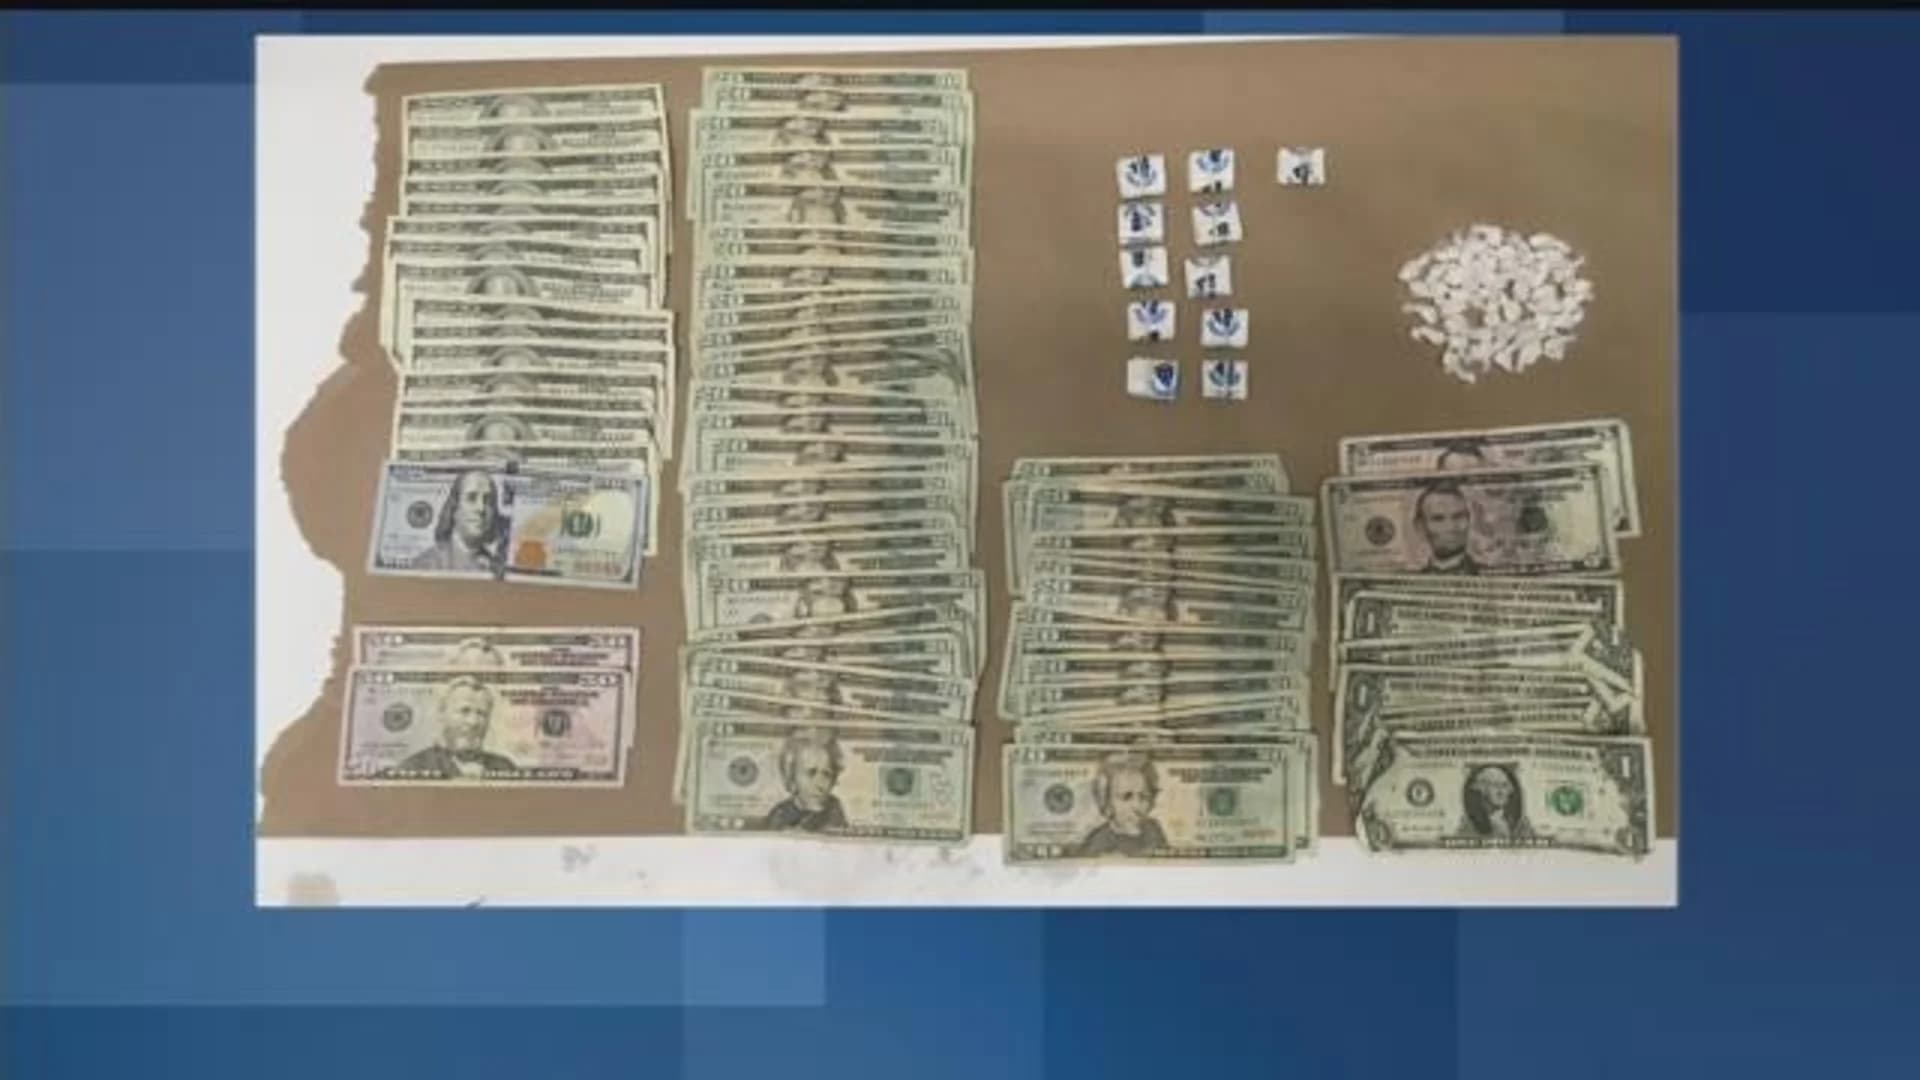 Police confiscate 110 bags of heroin, cash from car in Torrington